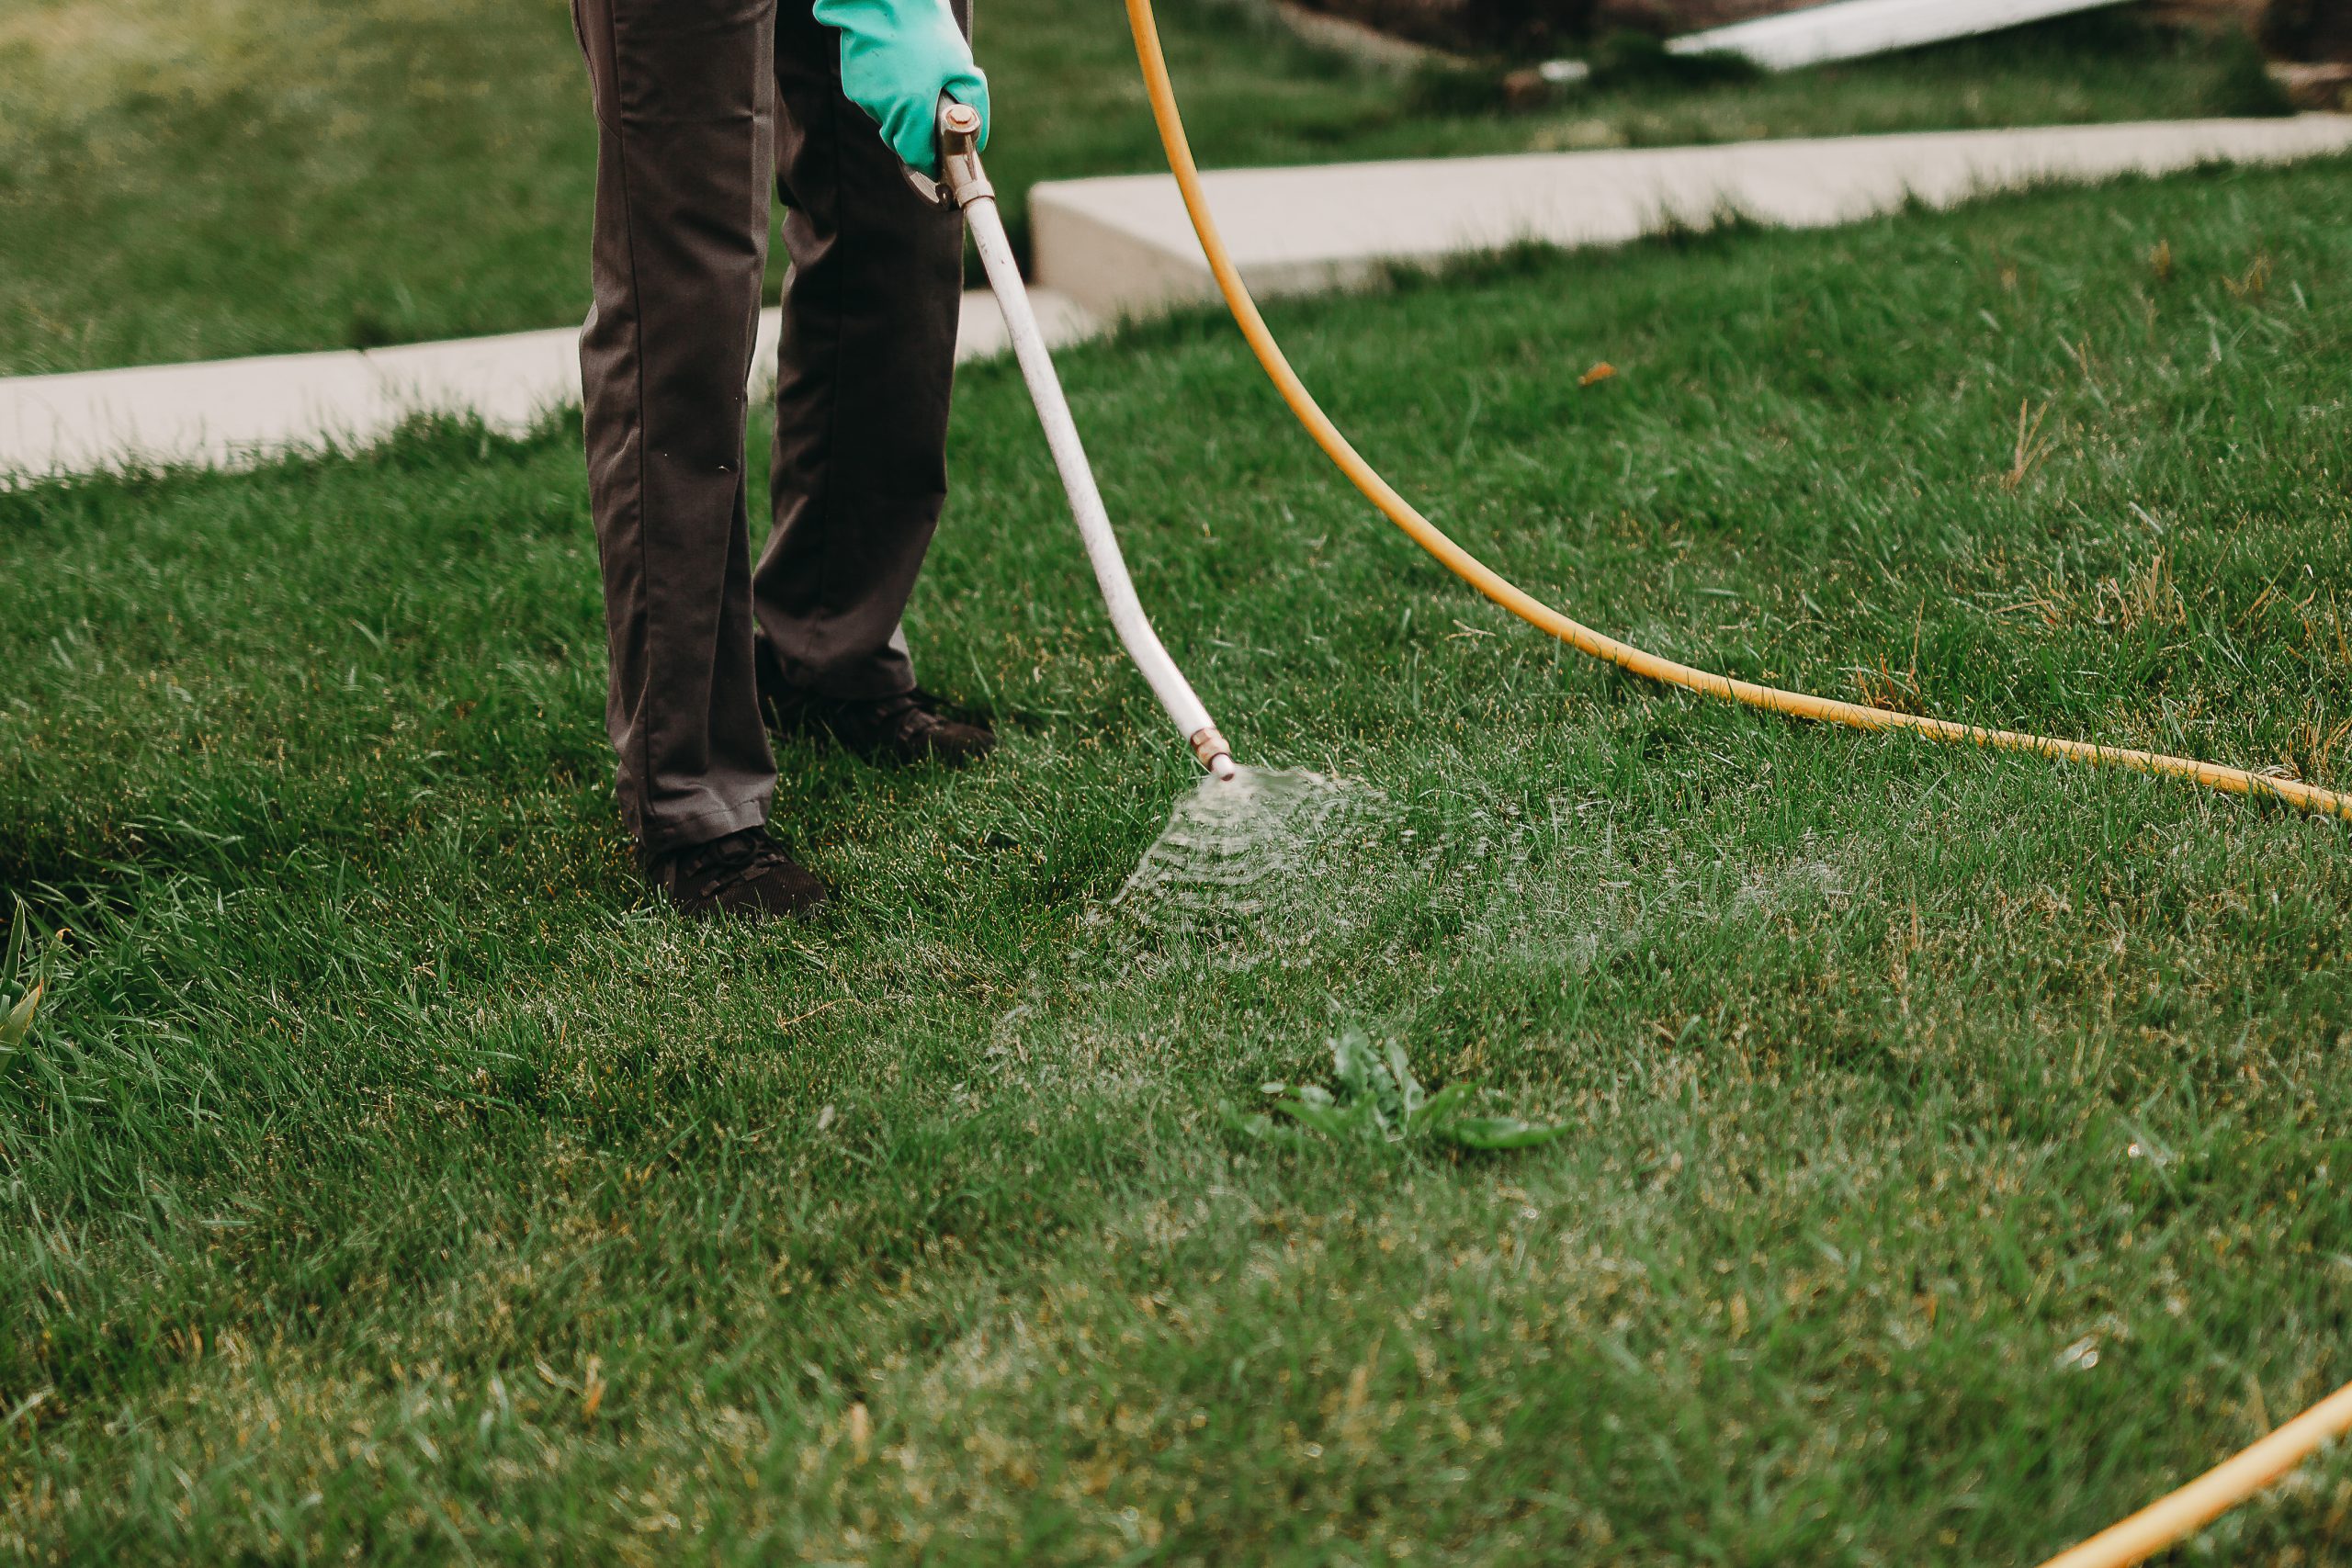 Triple R Landscaping offers effective spraying packages to keep your yard weed free year round.